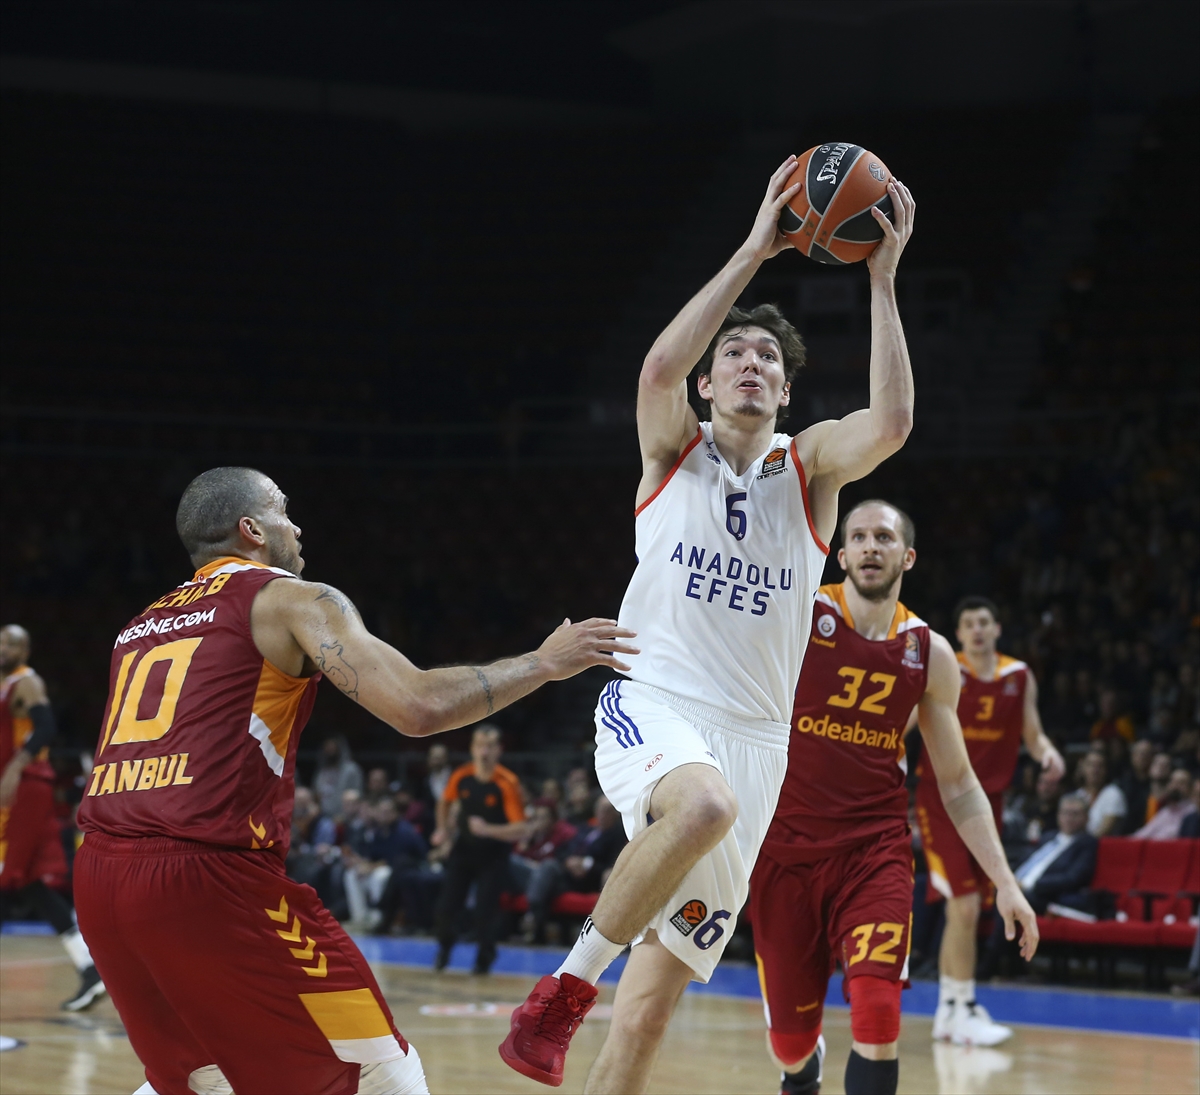 Anadolu Efes VS Galatasaray ( BETTING TIPS, Match Preview & Expert Analysis )™